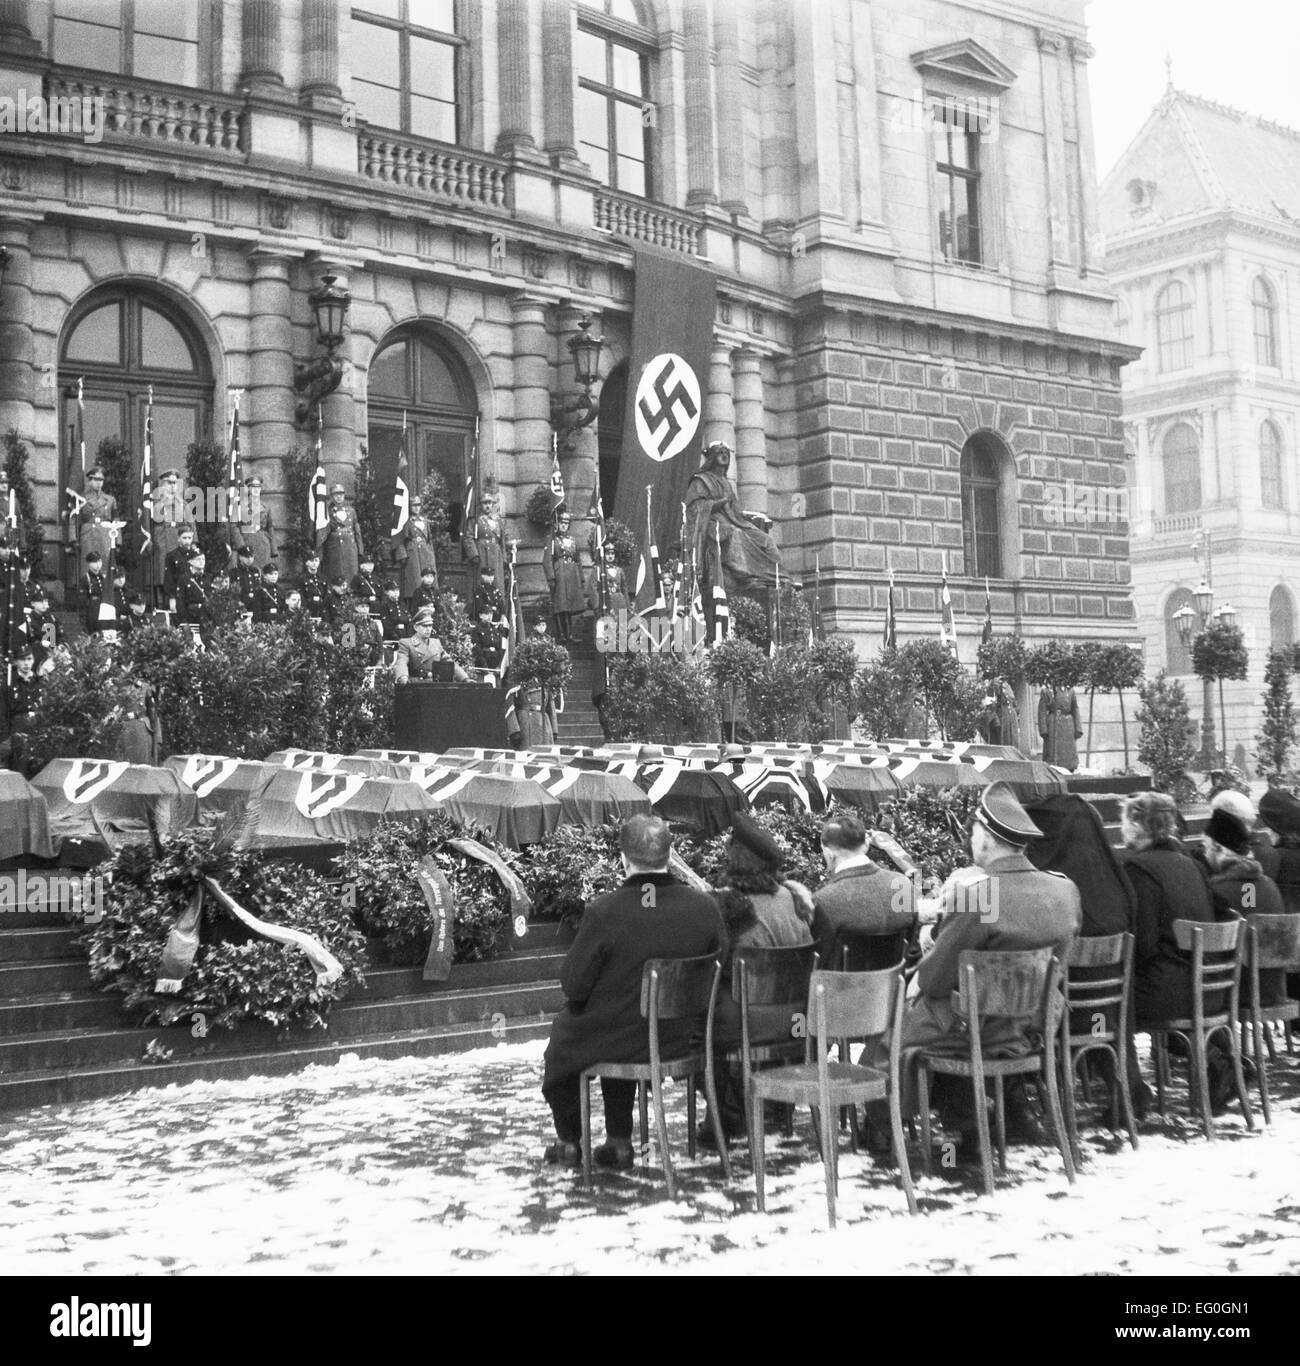 WWII Prague, Protectorate of Bohemia and Moravia, grieving Stock Photo